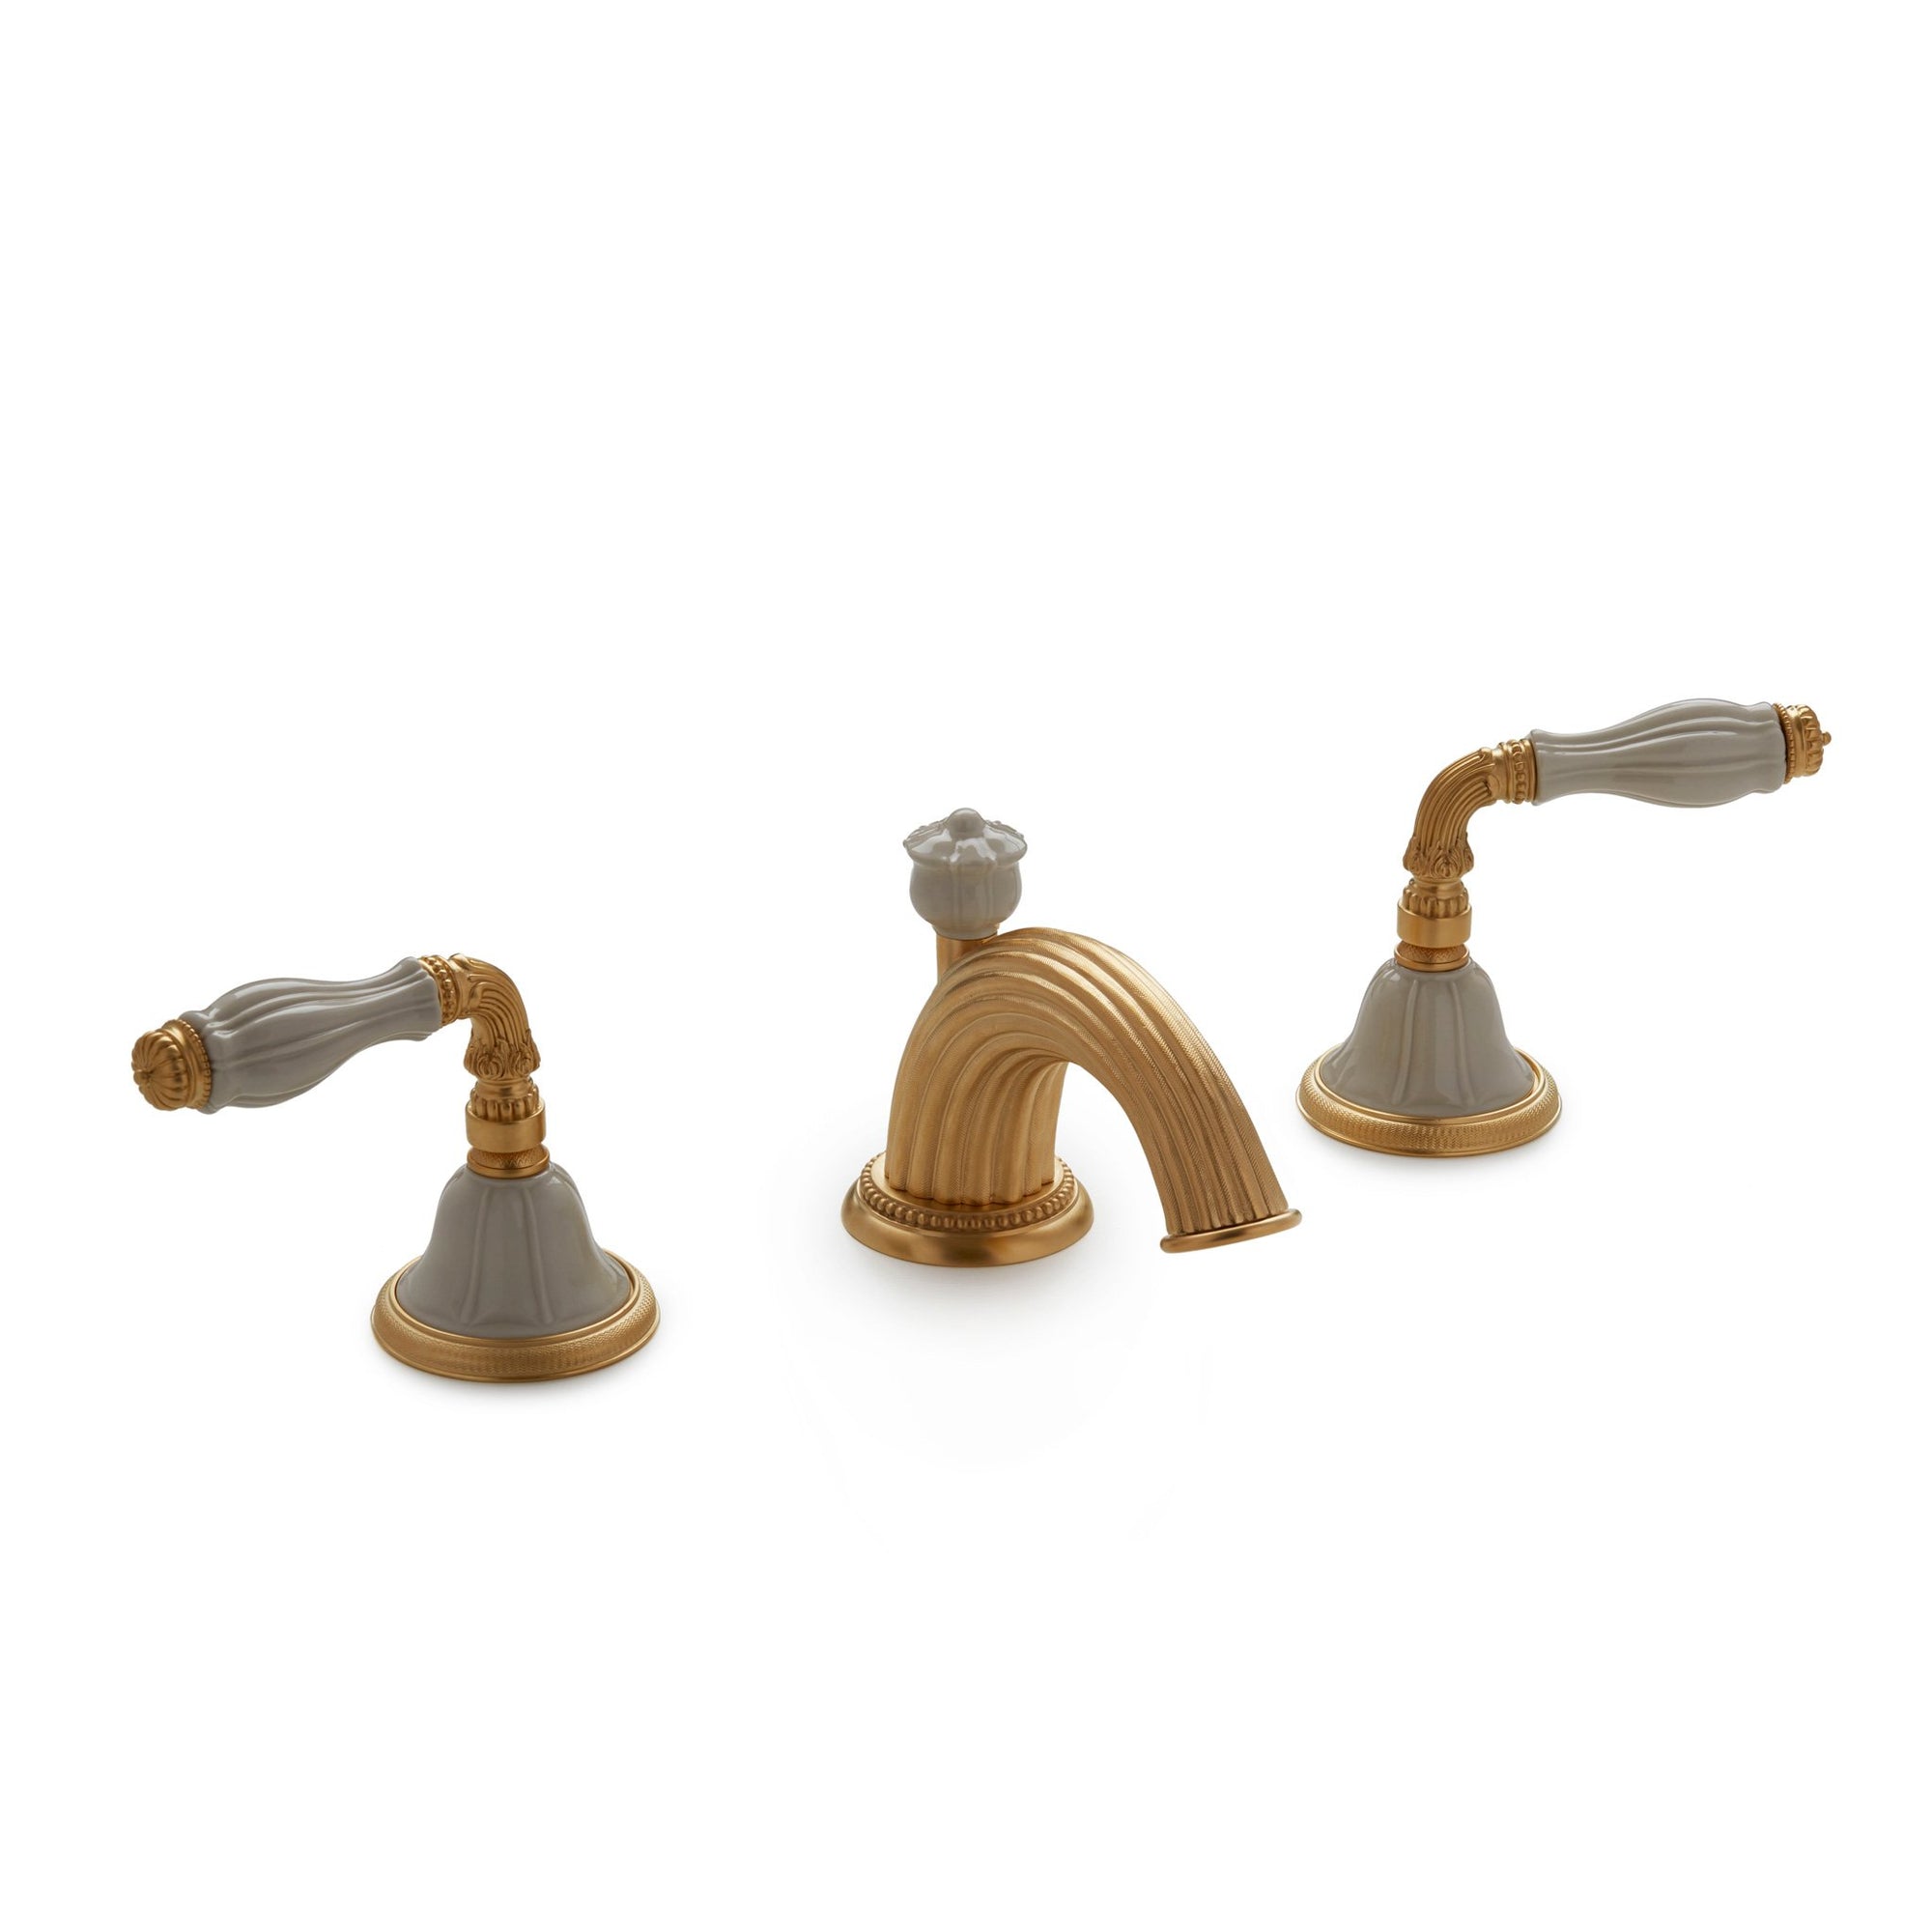 1029BSN821-03SD-GP Sherle Wagner International Scalloped Ceramic Fluted Lever Faucet Set in Gold Plate metal finish with Sand Glaze inserts